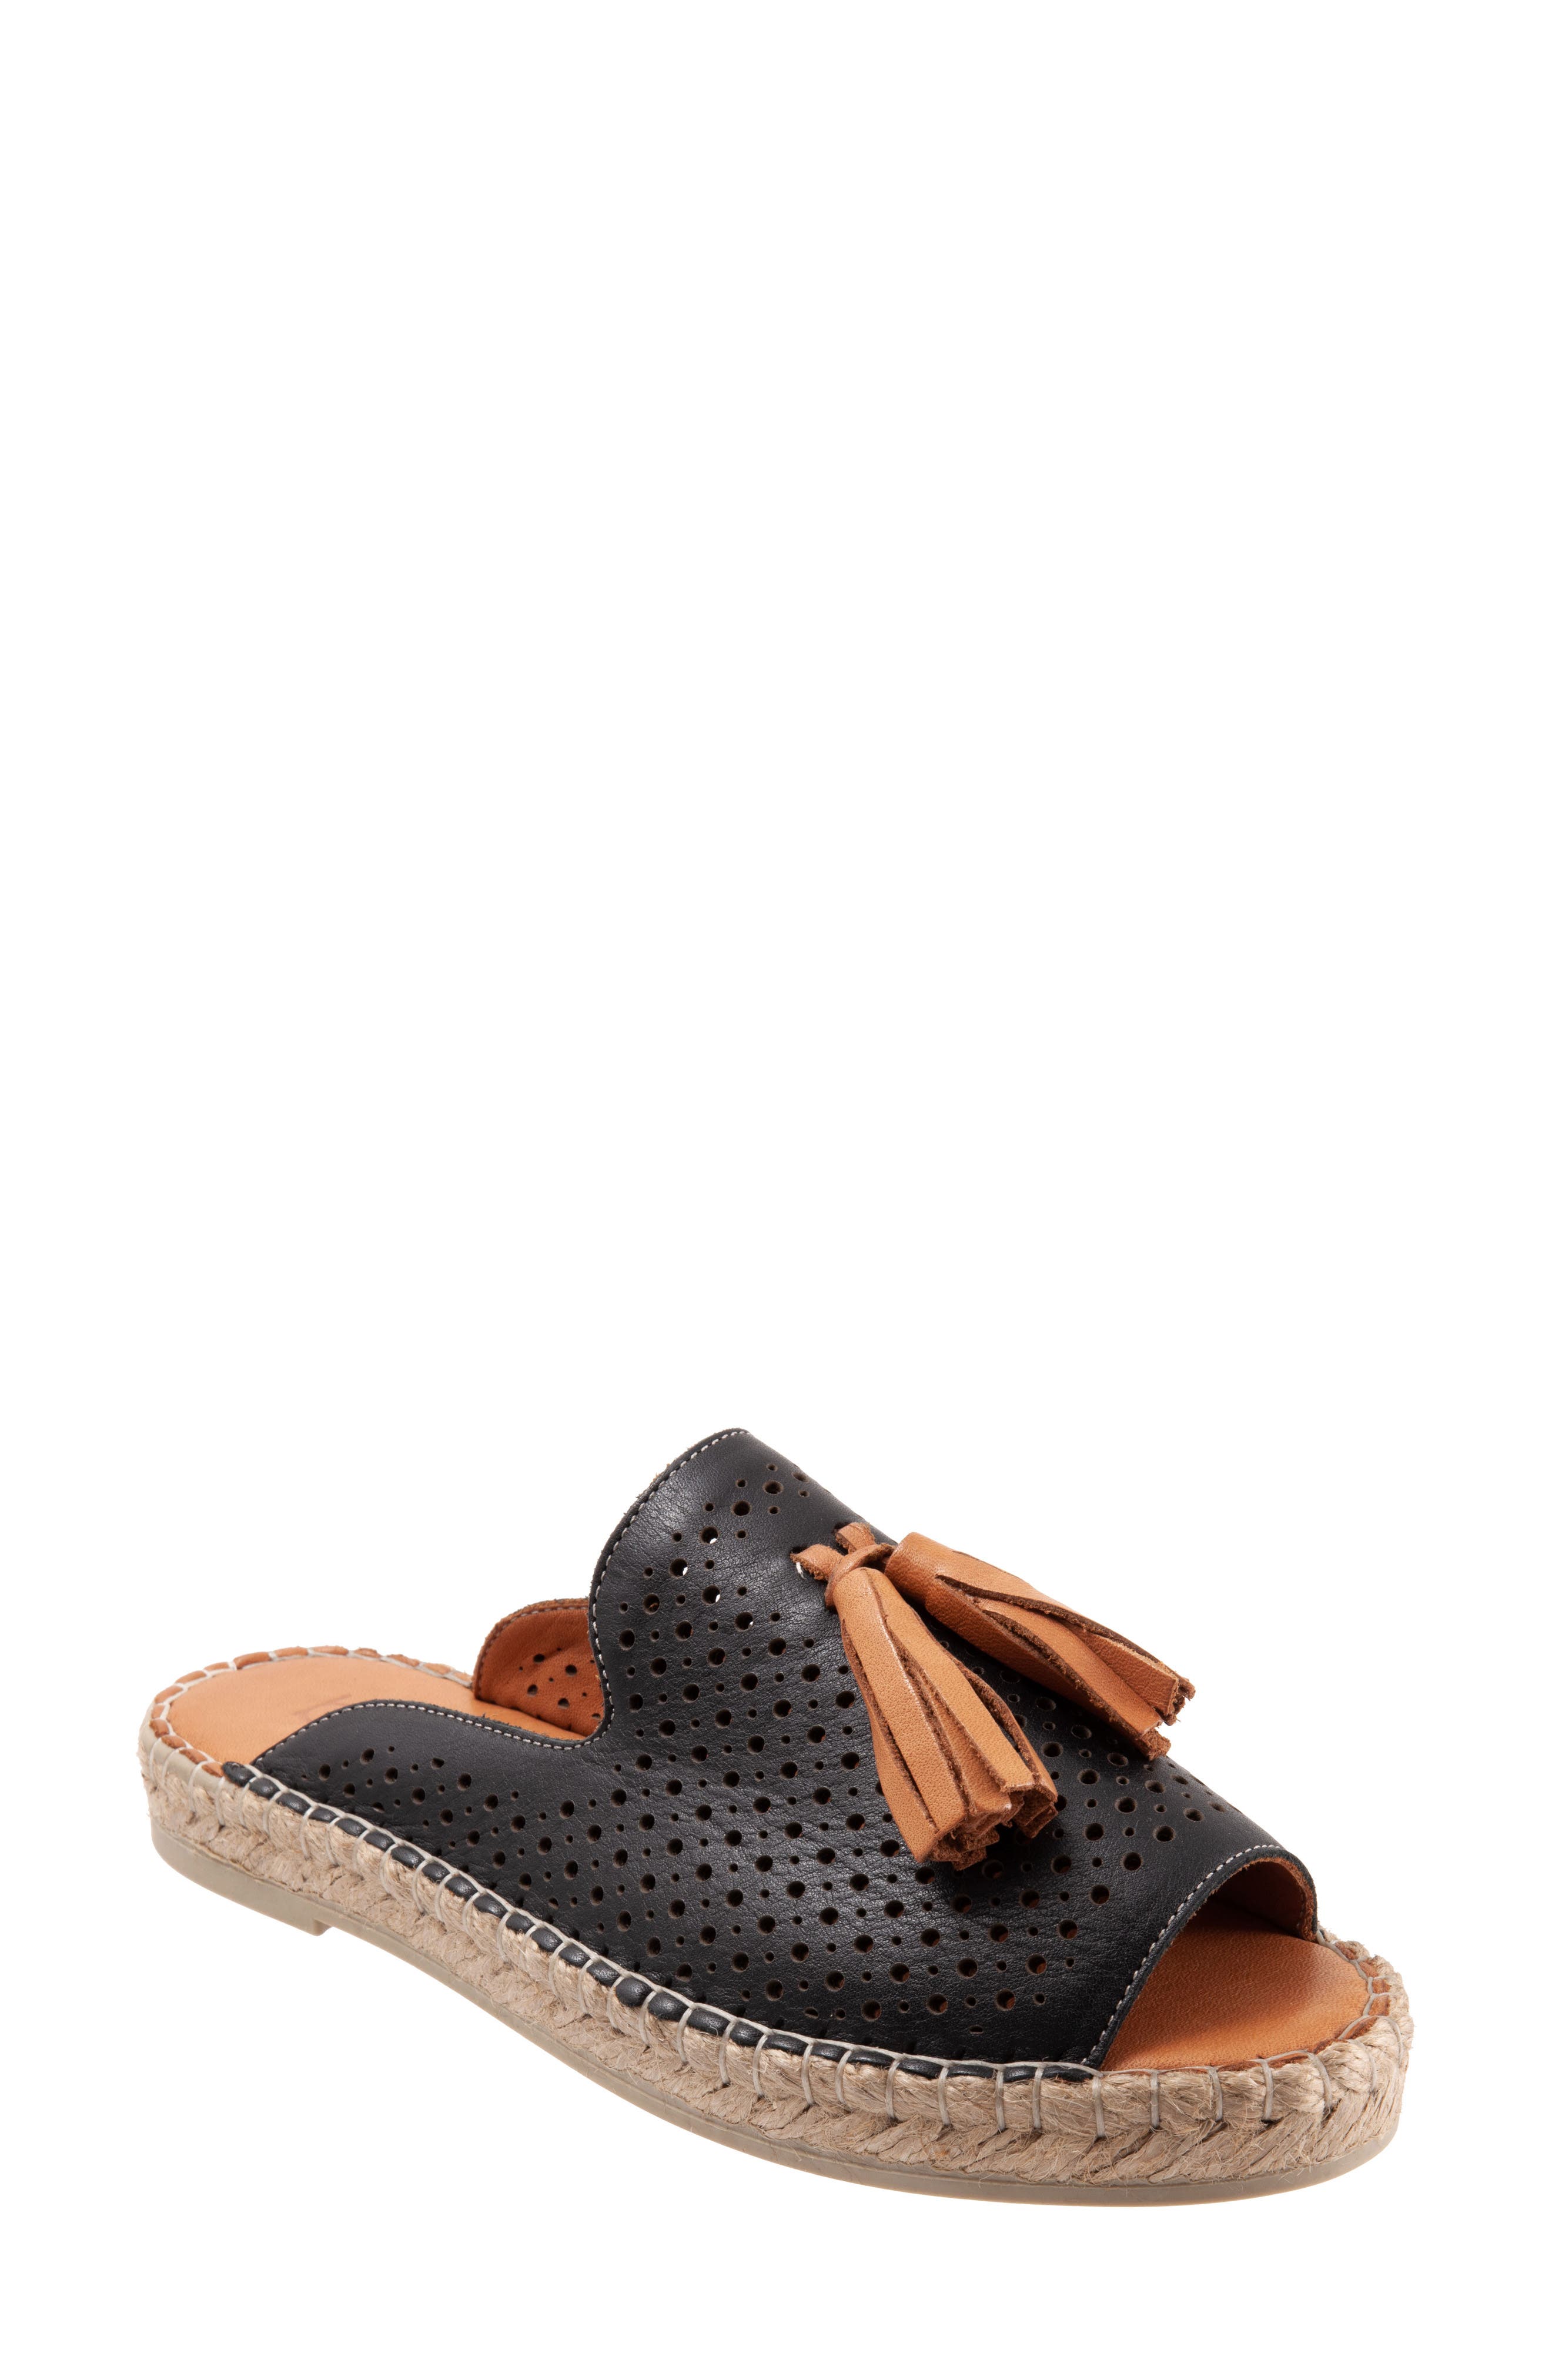 Women's Bueno Shoes | Nordstrom